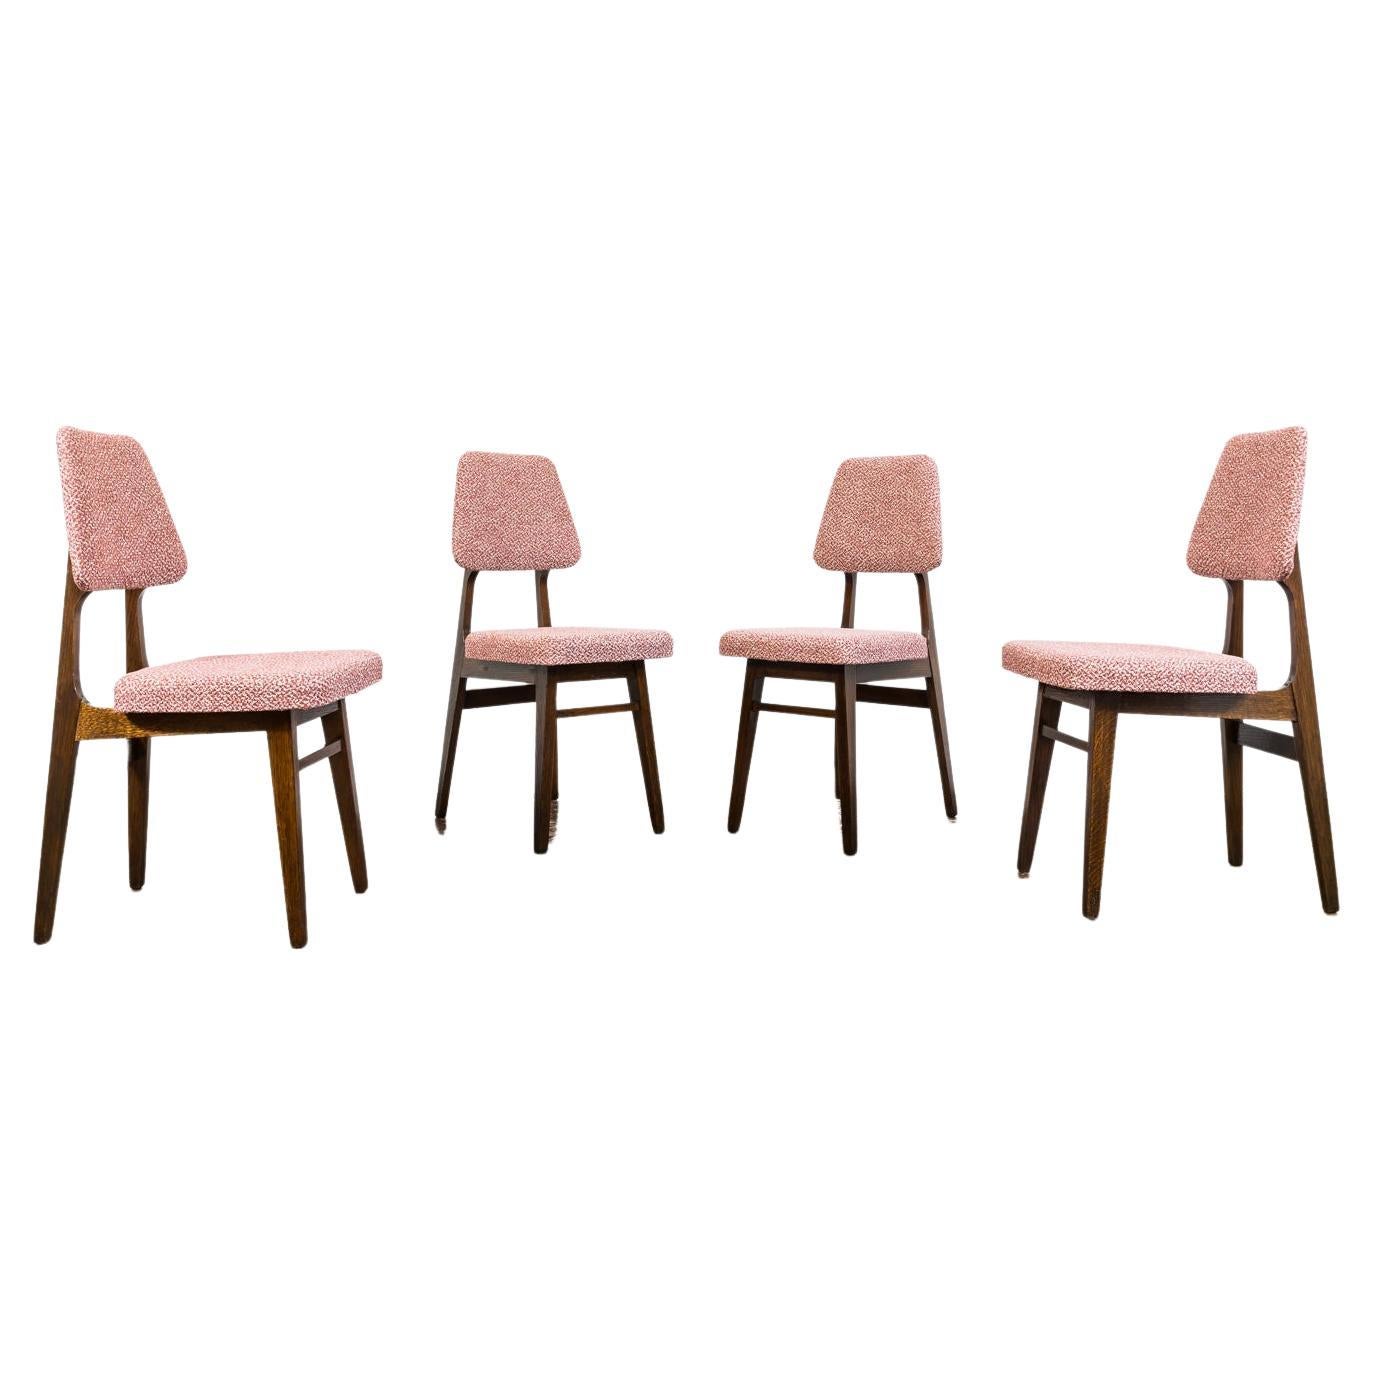 Set of 4 Restored Vintage Oak Wood Dining Chairs, 1960s